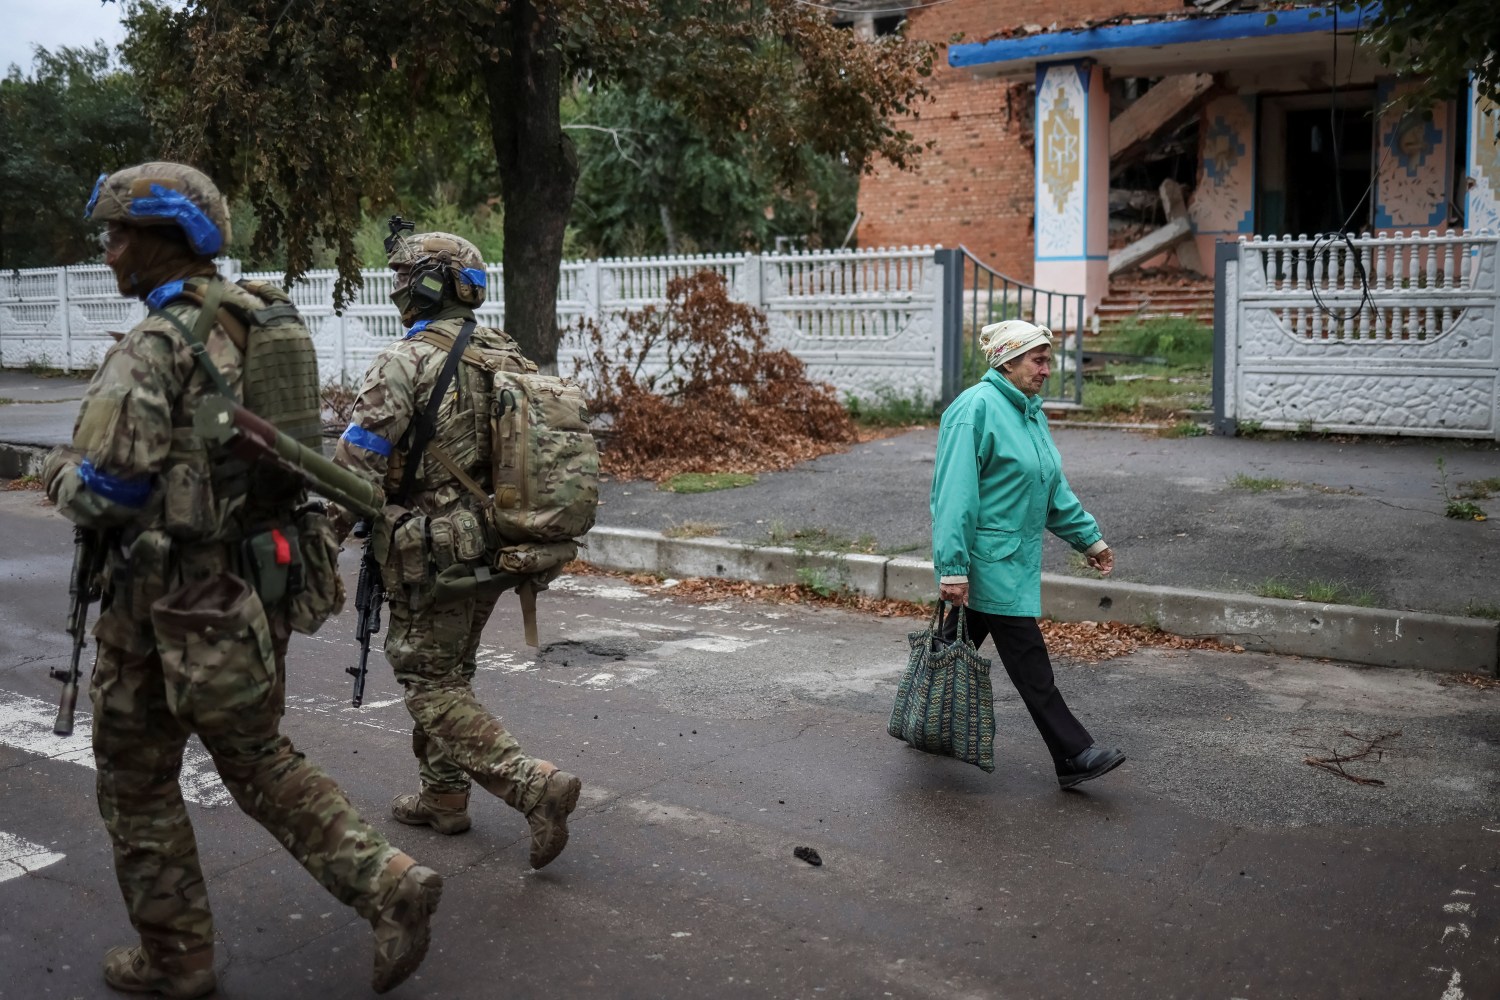 Ukrainian servicemen patrol an area, as Russia's attack on Ukraine continues, in the town of Izium, recently liberated by Ukrainian Armed Forces, in Kharkiv region, Ukraine September 14, 2022. REUTERS/Gleb Garanich